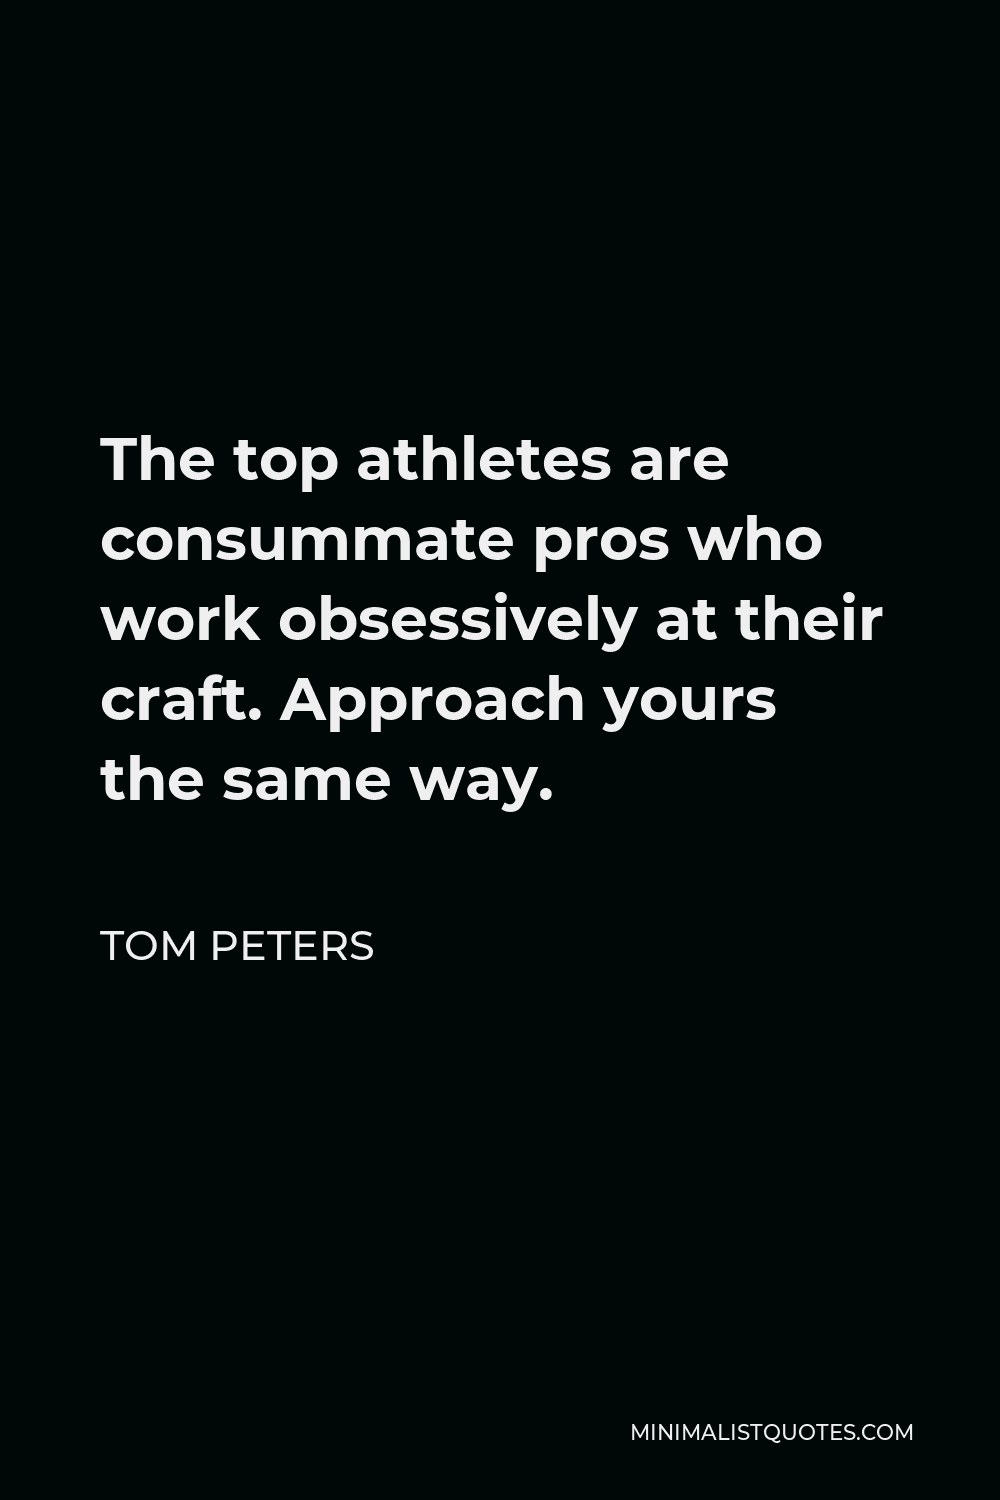 Tom Peters Quote - The top athletes are consummate pros who work obsessively at their craft. Approach yours the same way.